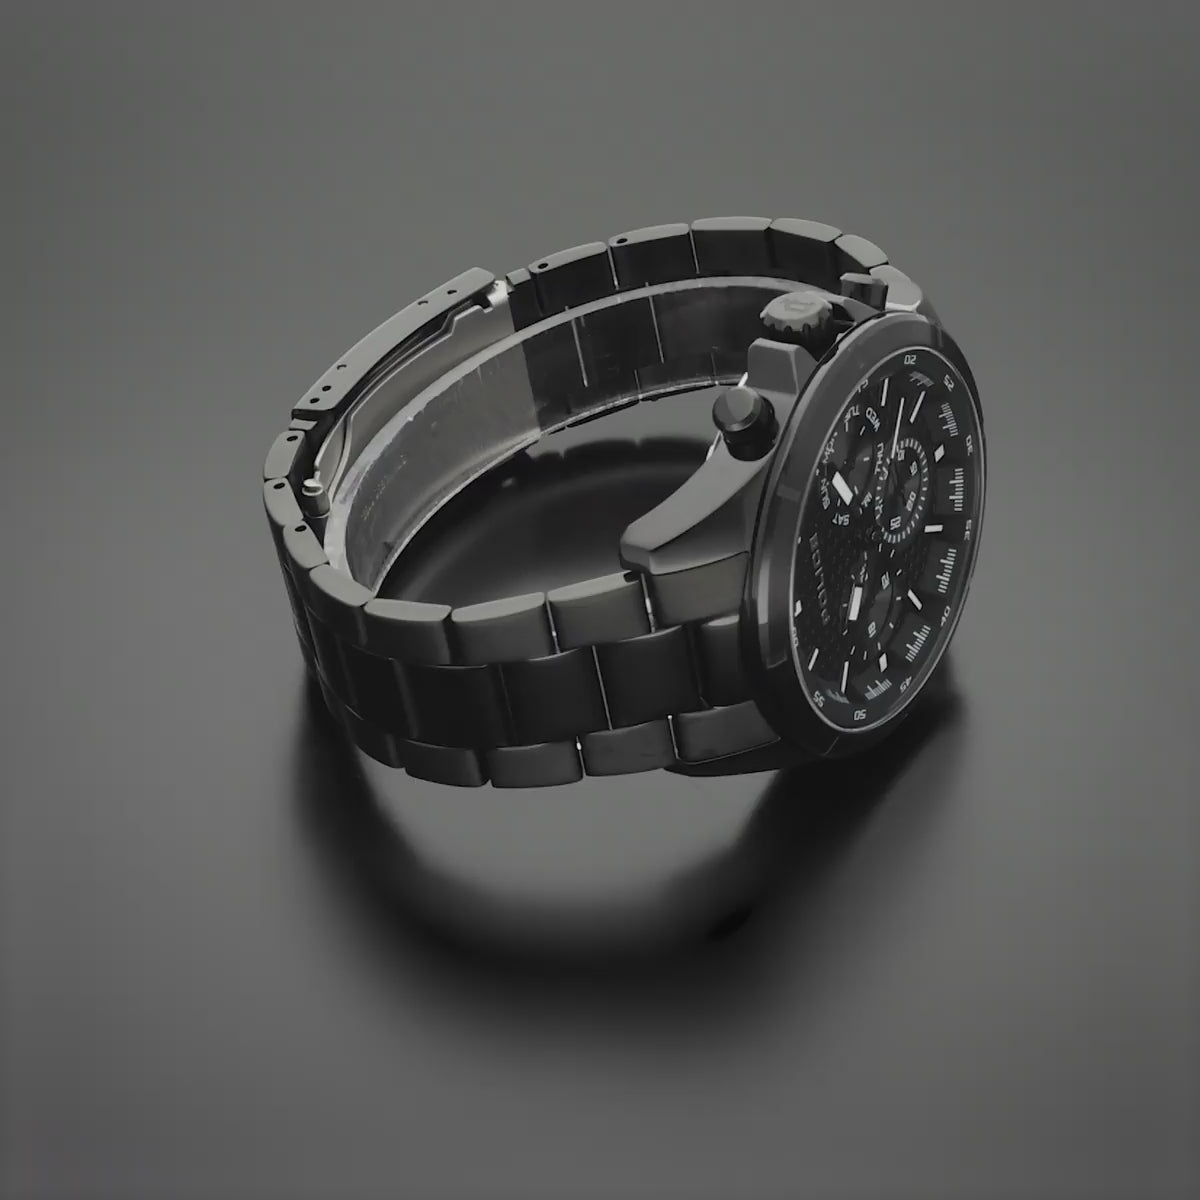 Police Malawi Multifunction 45mm Stainless Steel Band